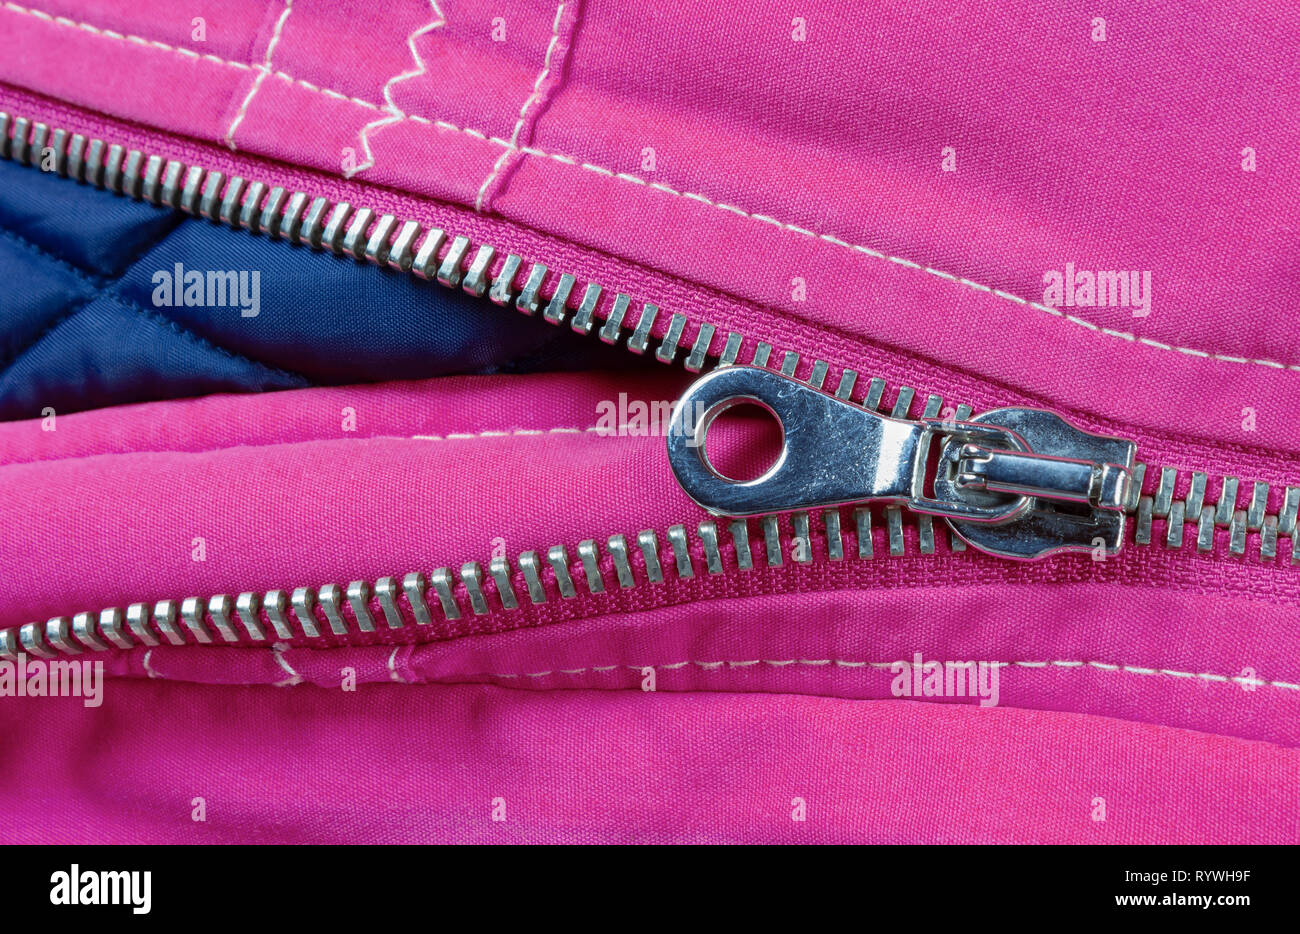 Detail of the zipper of a purple and blue down jacket Stock Photo